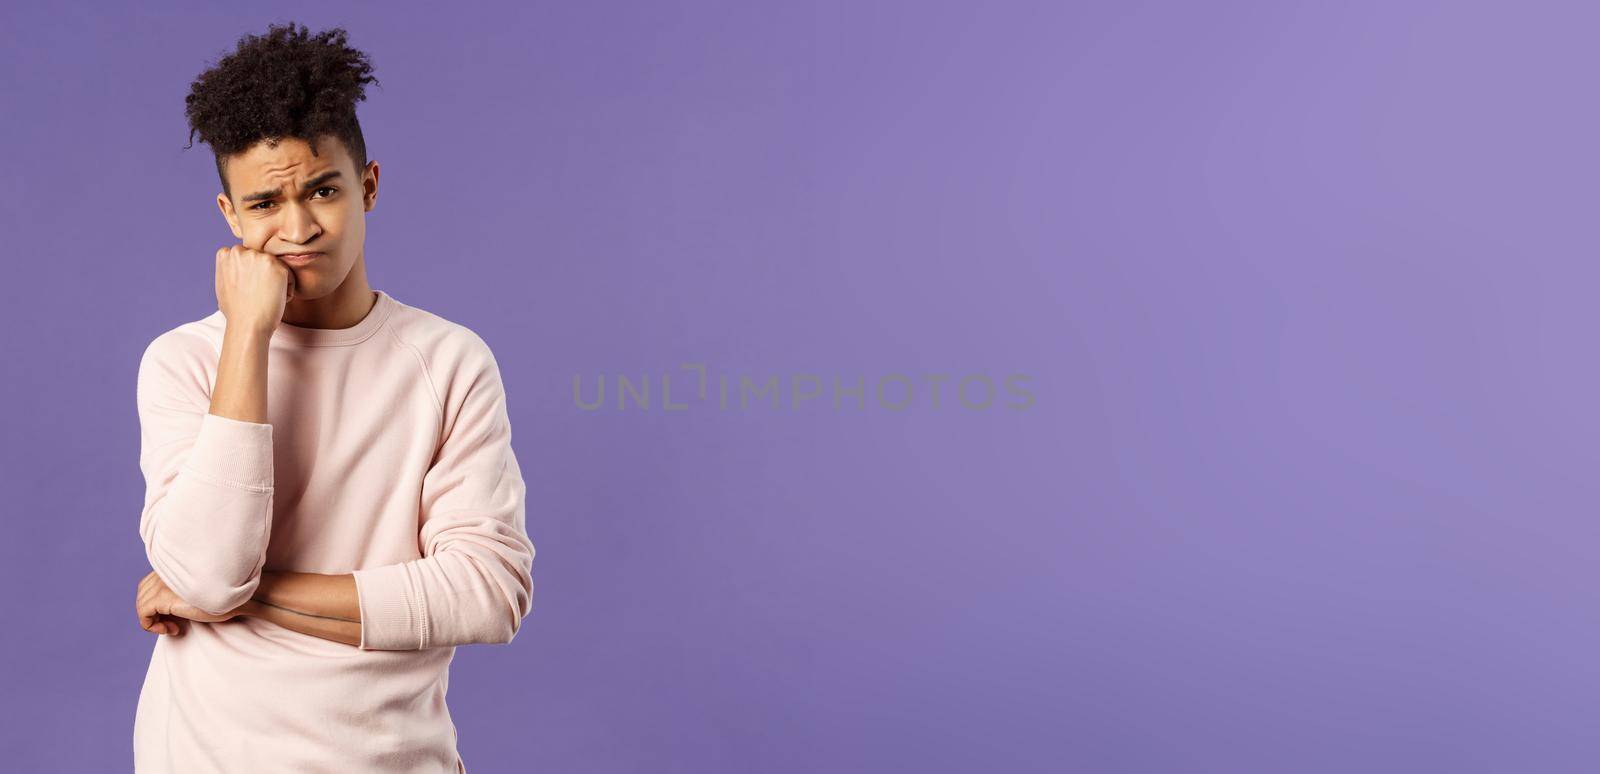 Portrait of complicated, troubled young hispanic man facing tough problem, lean on fist grimacing and pouting, solving troublesome situation, thinking, feeling uneasy, purple background by Benzoix